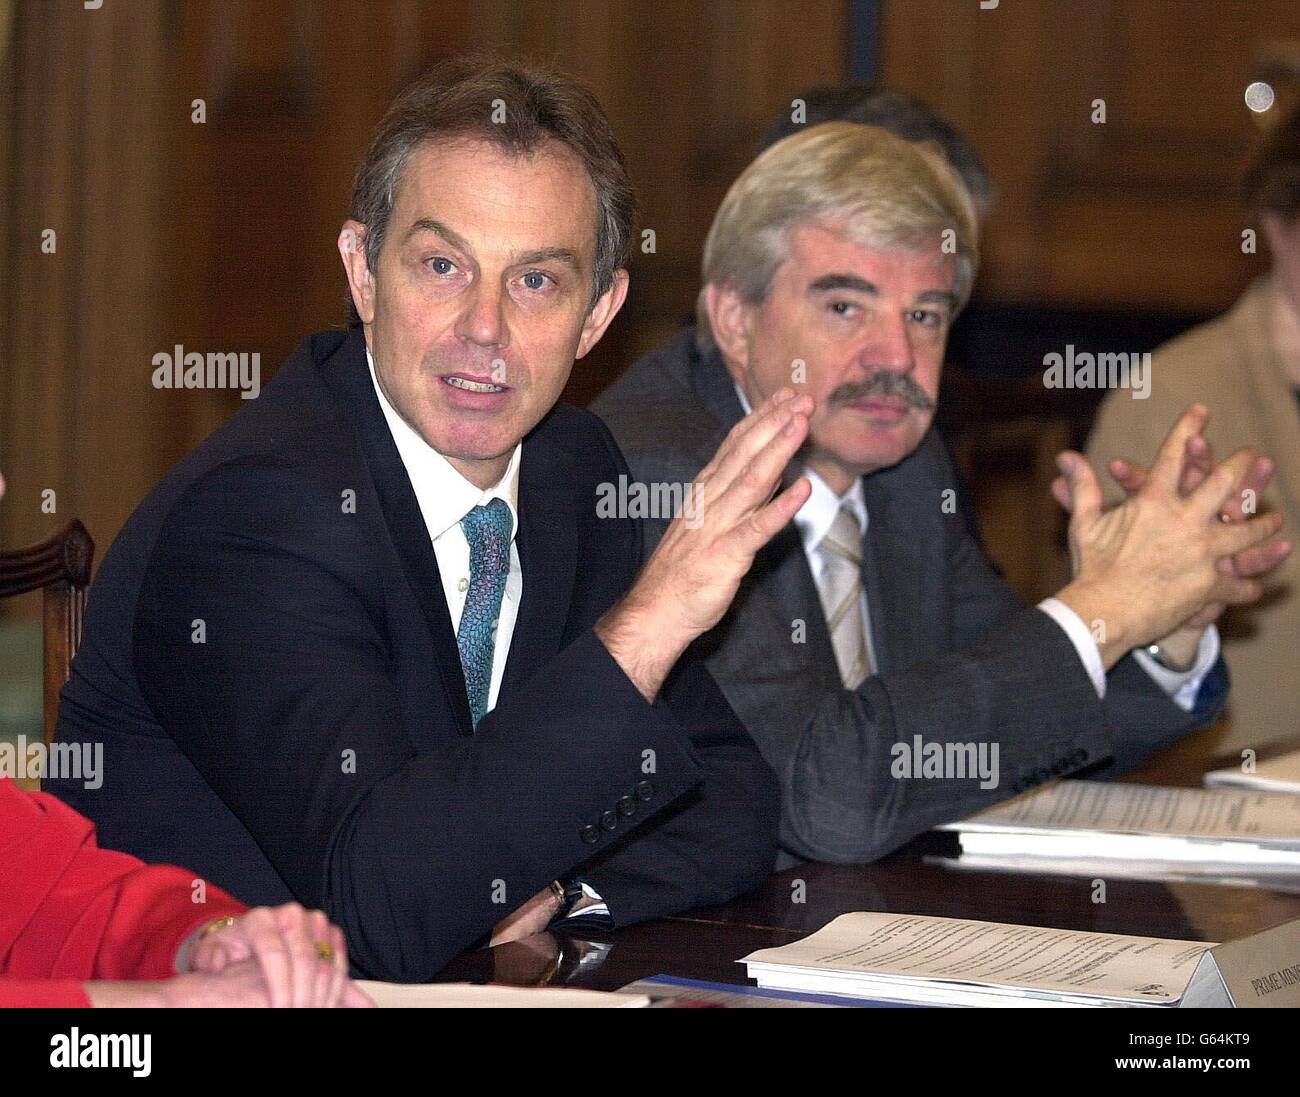 Prime Minister, Tony Blair sits next to Lord Whitty, Parliamentary Under Secretary for Environment, Food and Rural Affairs at a farmers and food producers meeting at No. 10 Downing Street, London. * The food and farming sector will play an important role in improving the health of the nation, the Government has announced. An action plan covering a wide range of issues is aimed at encouraging people to eat a better diet. Stock Photo